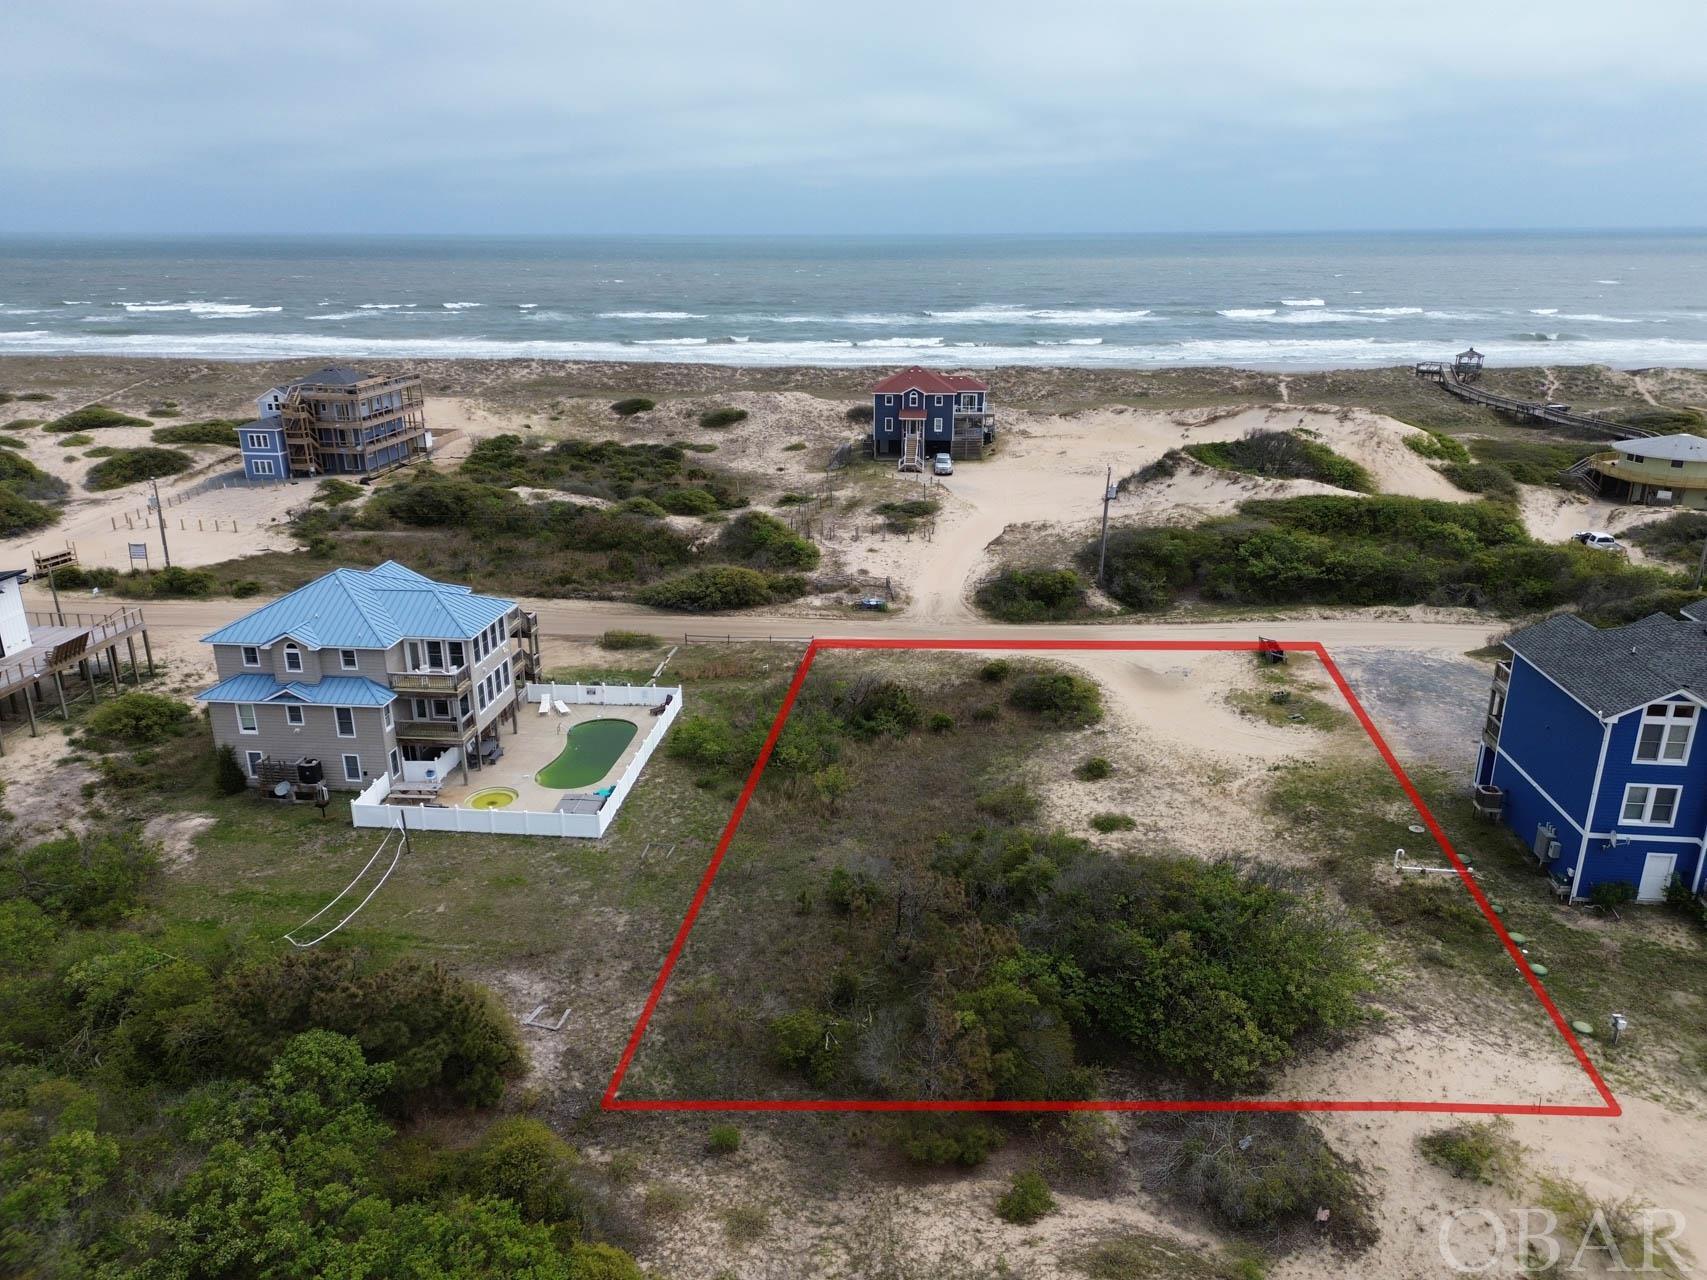 Build your dream home on this remarkable Semi-Oceanfront lot with great elevation. Easy access to the beach! Ocean Views from a two story home should be very nice, plus easy access to the beach! Survey, Soil Report and Site Evaluation are available - All that's left to do is build the home of your dreams! Located in the x flood zone, this would make an ideal location for your future second home or vacation rental property. Very stable and thick frontal dunes, east access to the beach, and great potential views! This lot is a must see in Carova Beach, the 4-wheel drive section of Corolla.